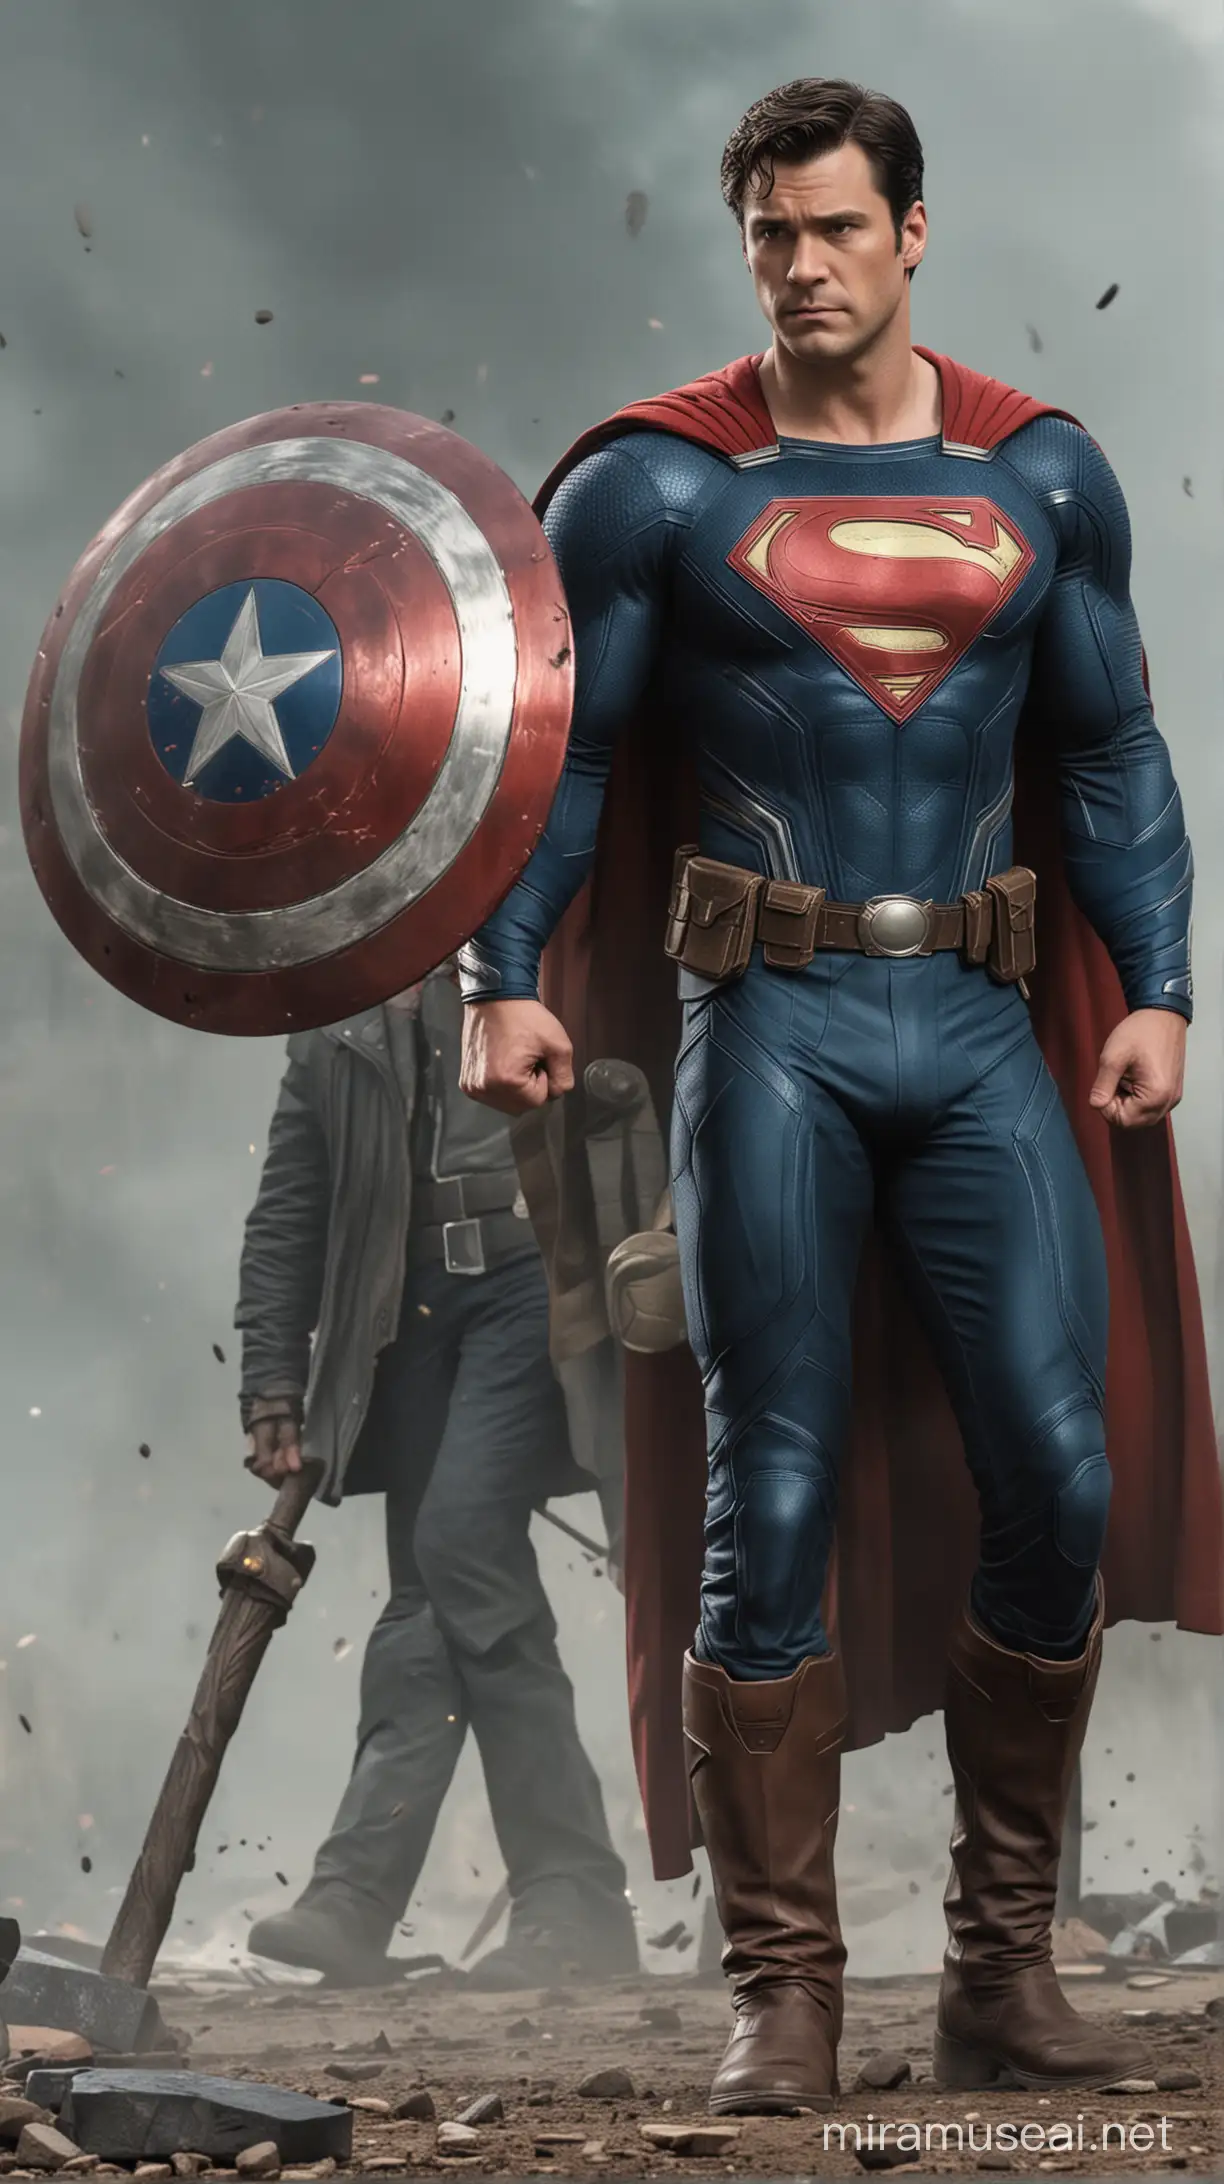 Superman holding Captain America’s Shield in his left hand and Thor’s Hammer in his right hand. He is looking at us with a very serious look on his face. 